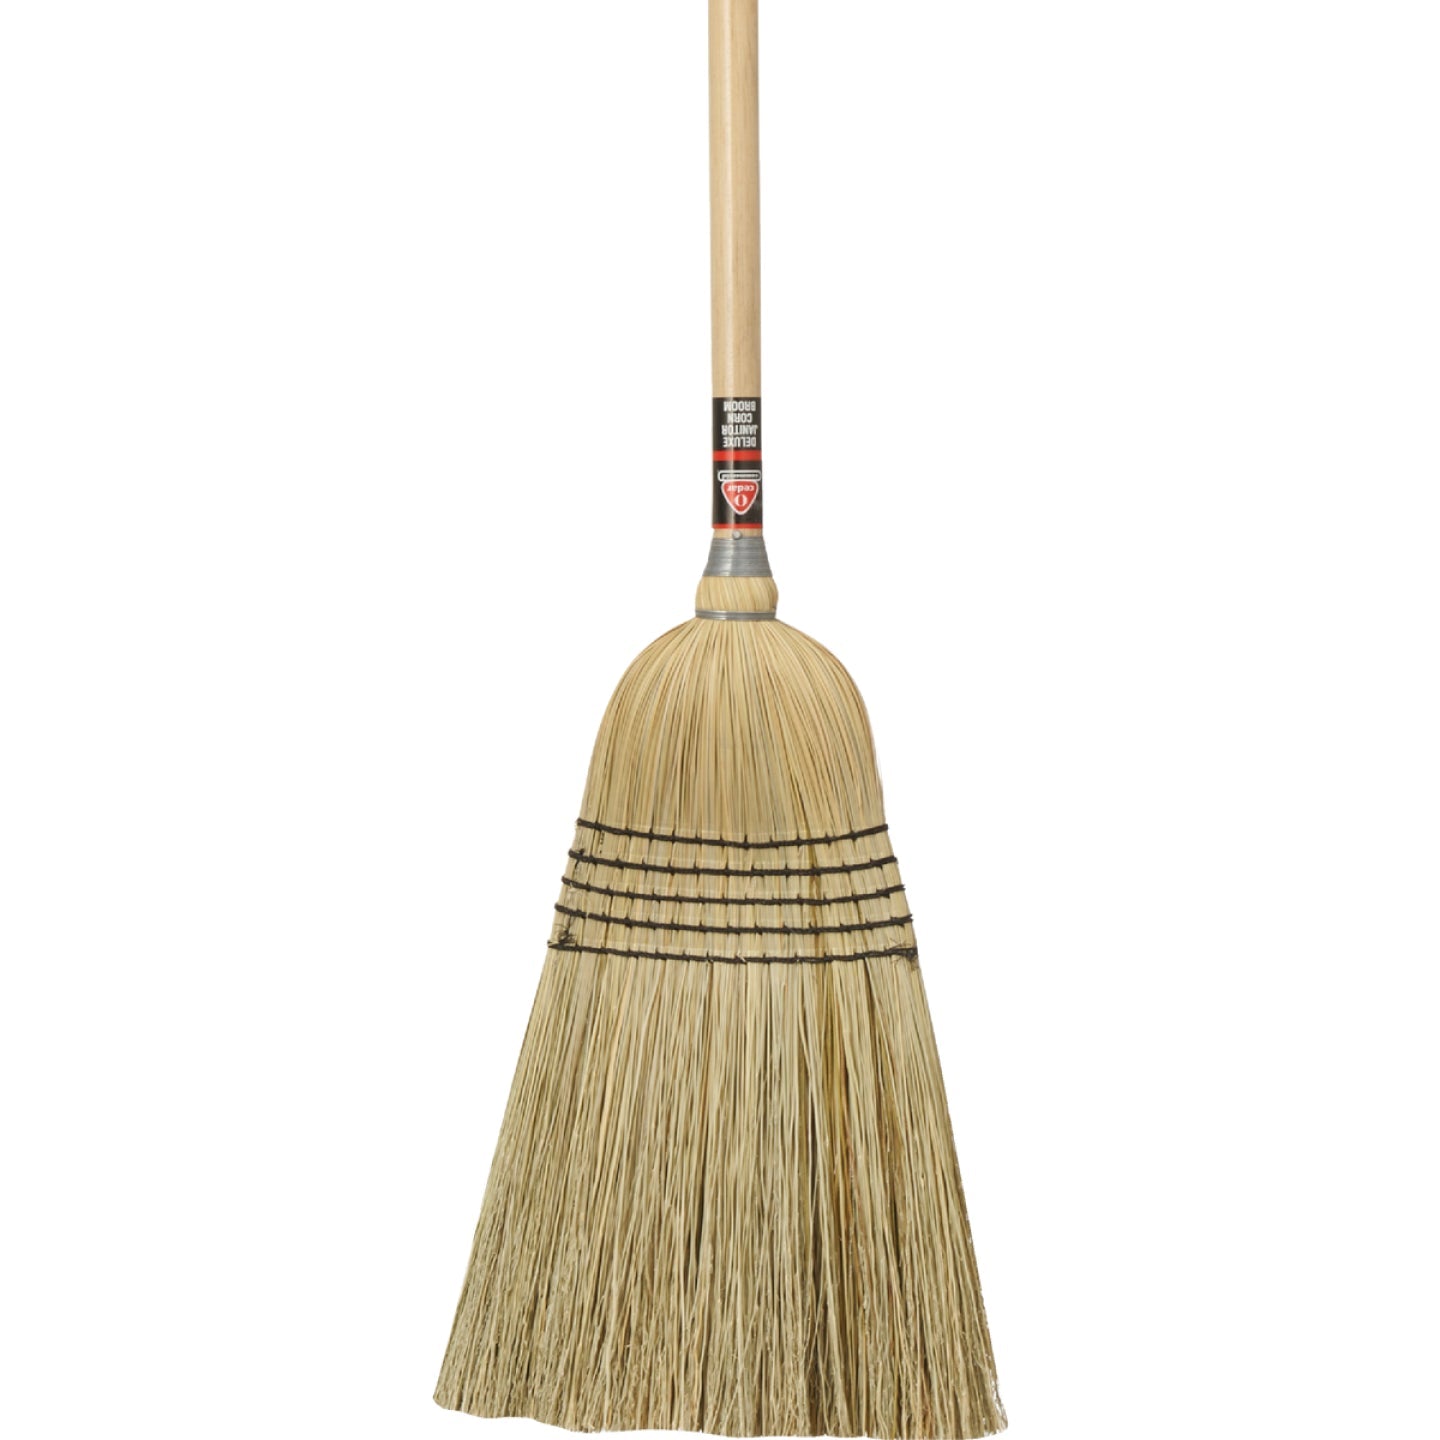 Nexstep Commercial, Nexstep 14 In. W. x 59 In. Lacquered Wood Handle Commercial Janitor Corn Broom